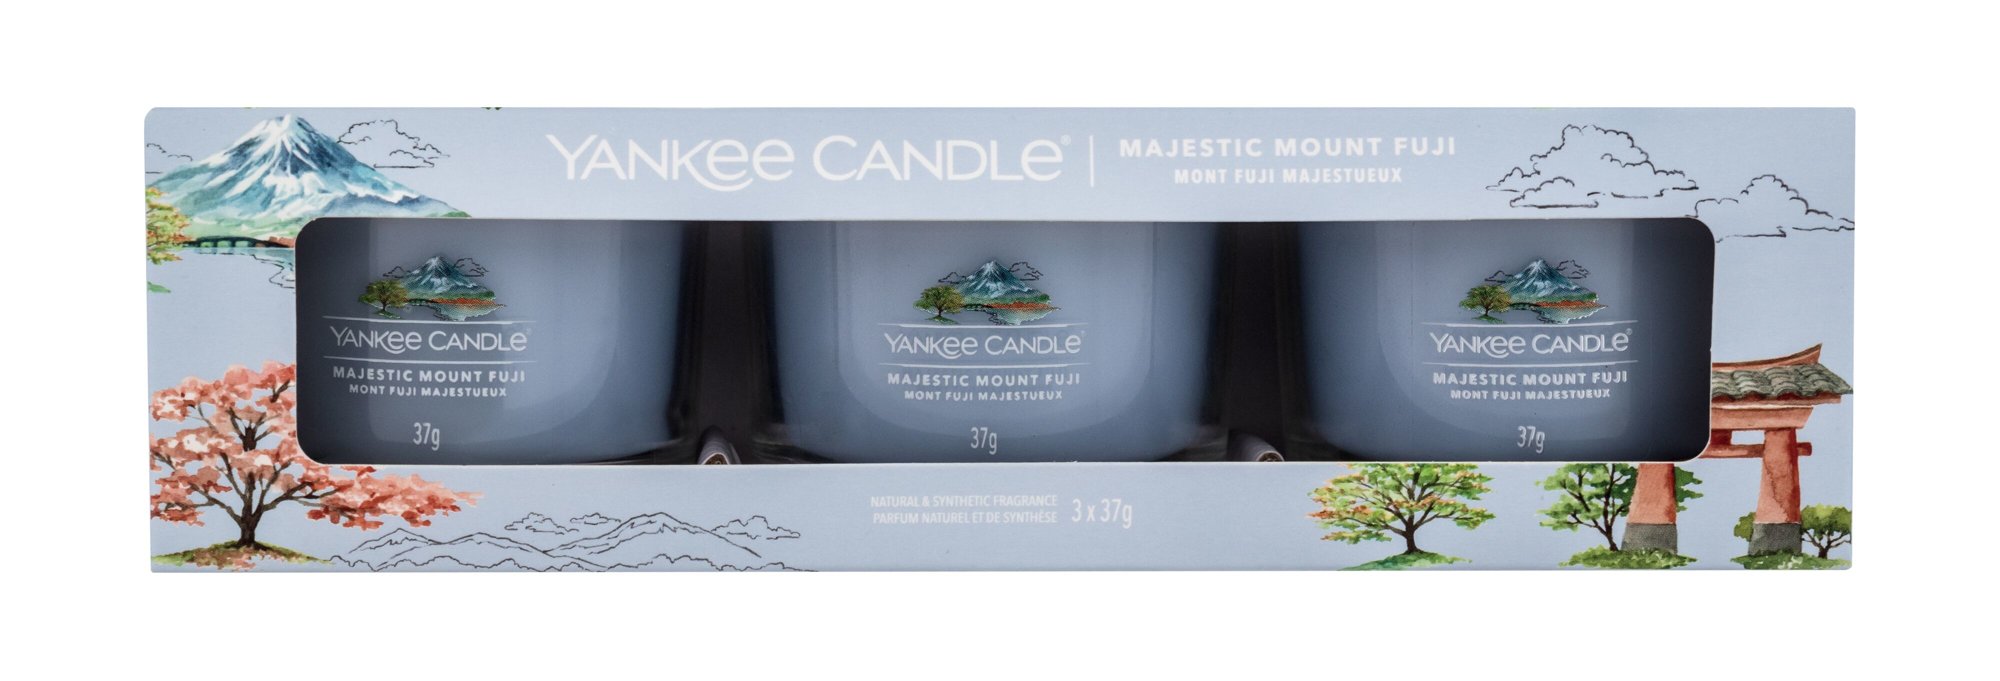 Yankee Candle Majestic Mount Fuji 37g Scented Candle 3 x 37 g Kvepalai Unisex Scented Candle Rinkinys